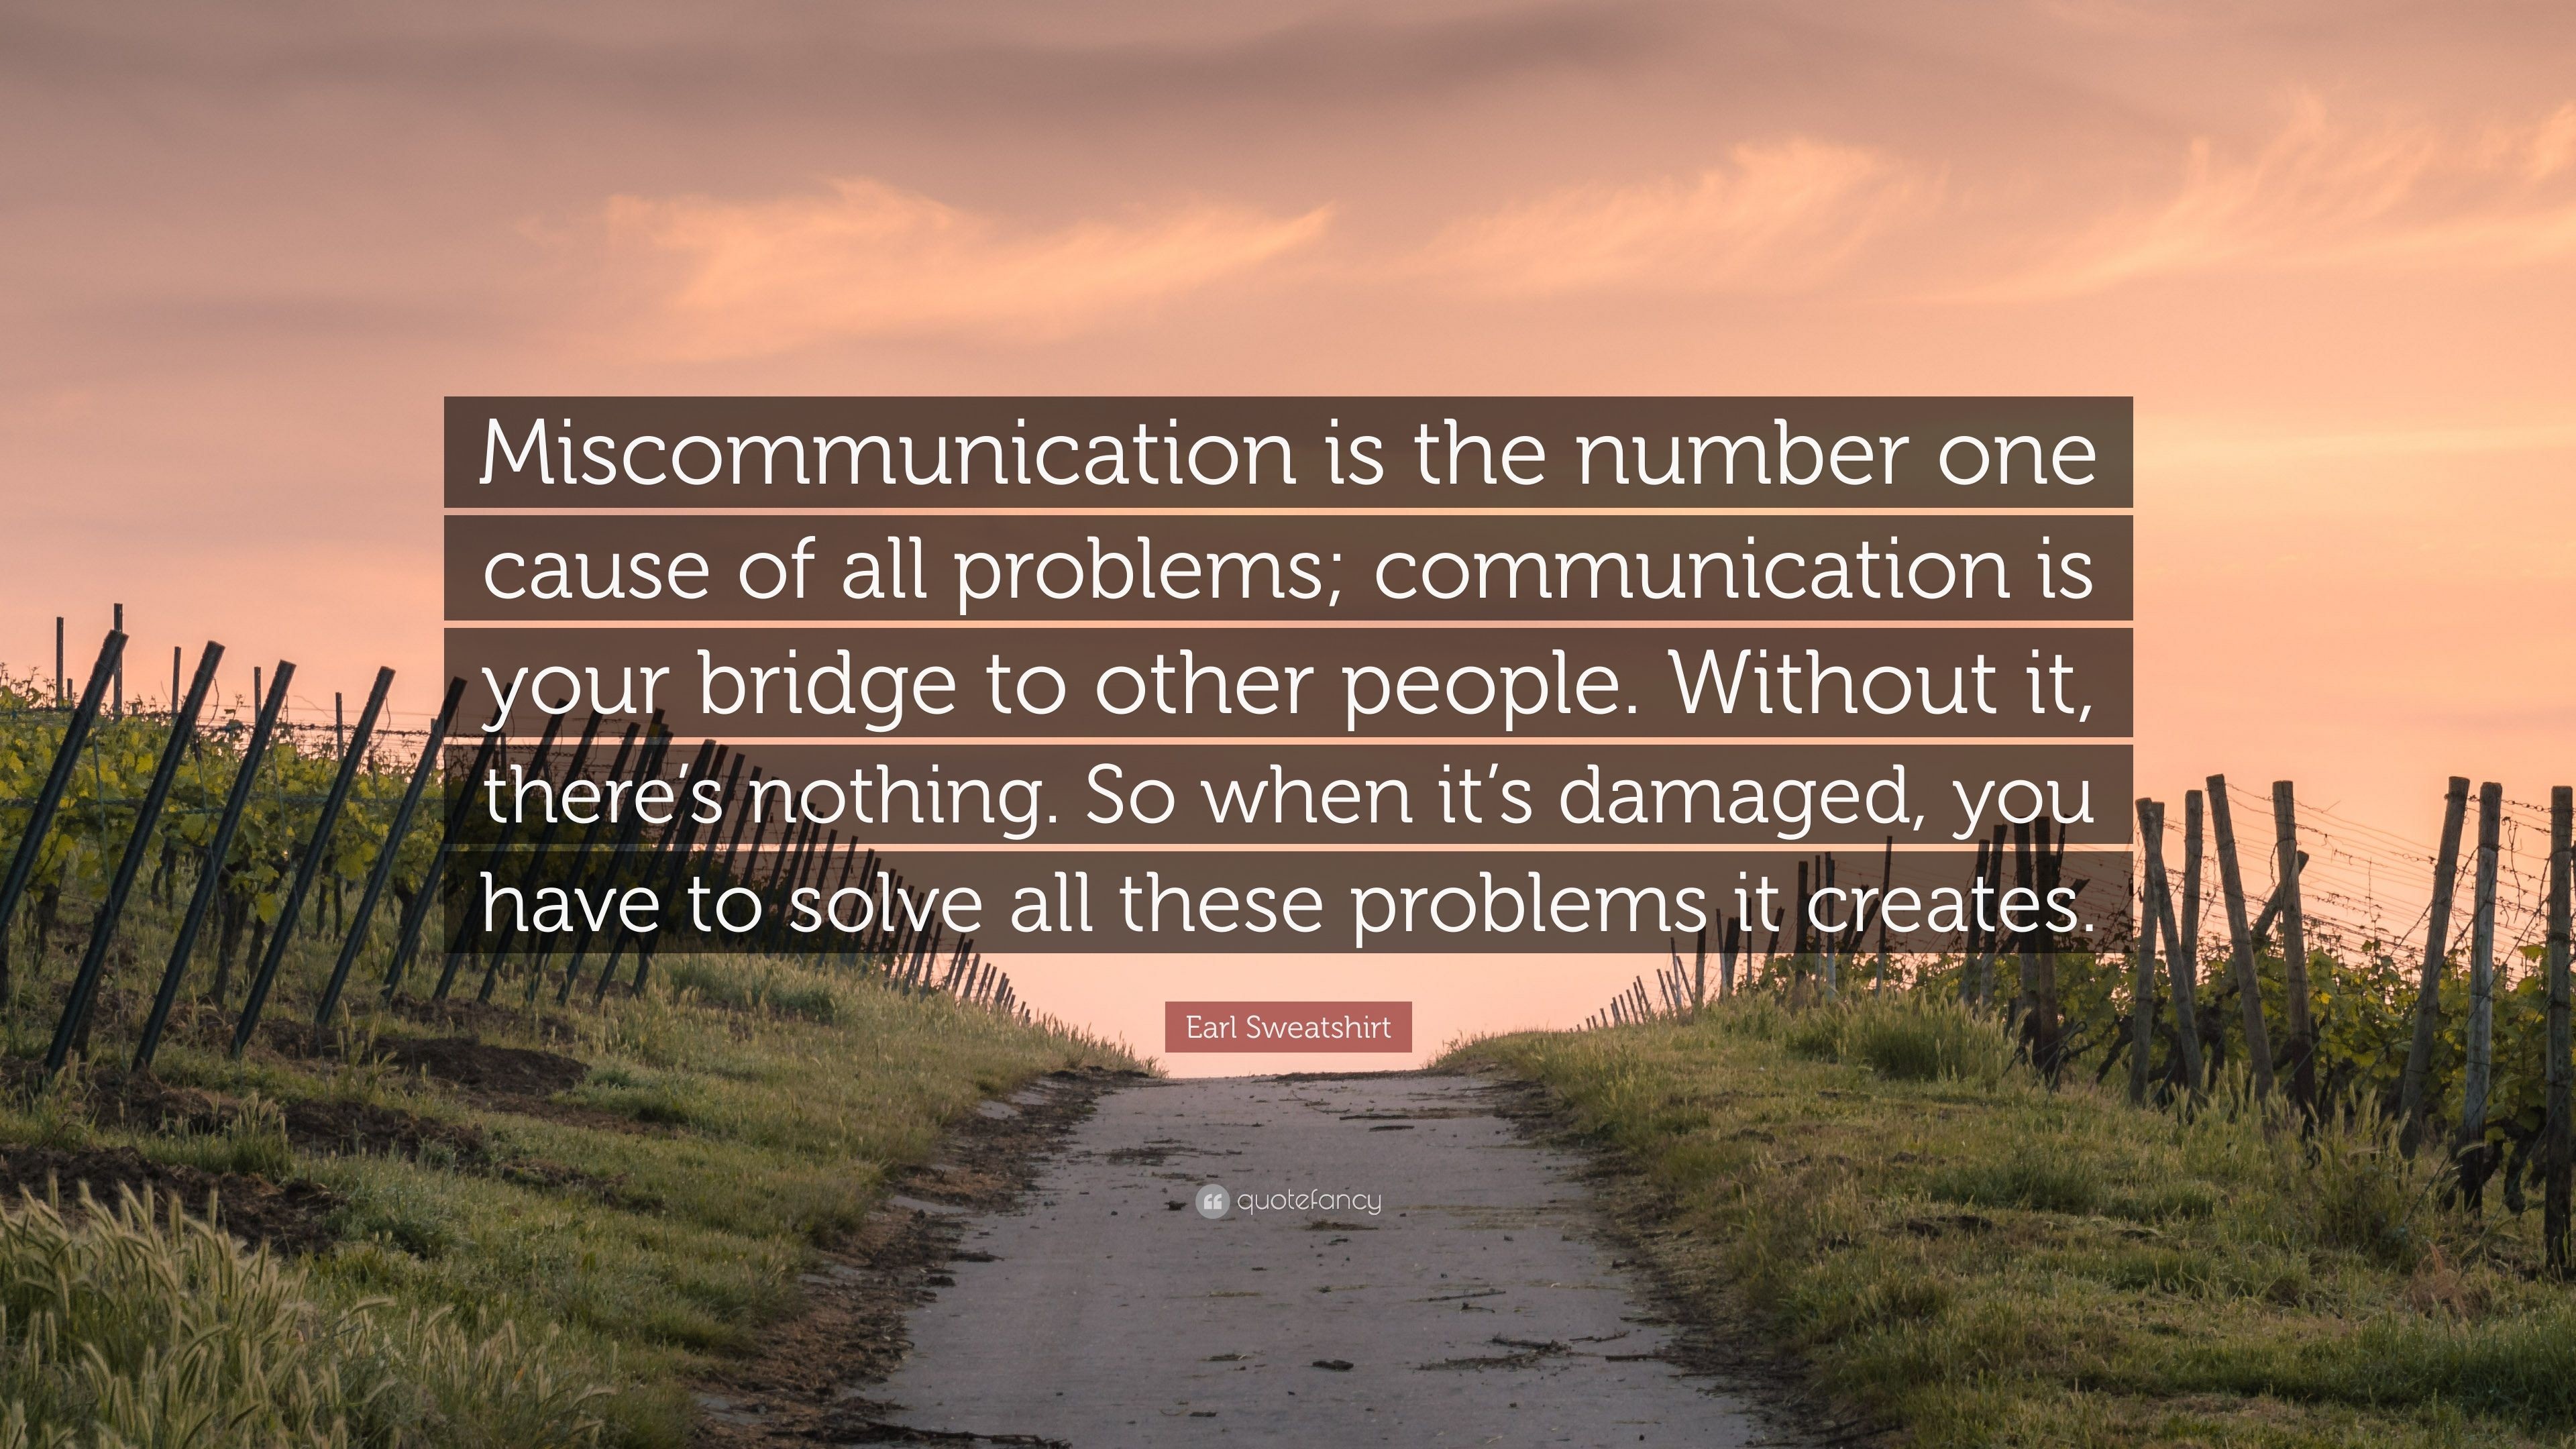 3840x2160 Earl Sweatshirt Quote: “Miscommunication is the number one cause of all  problems; communication